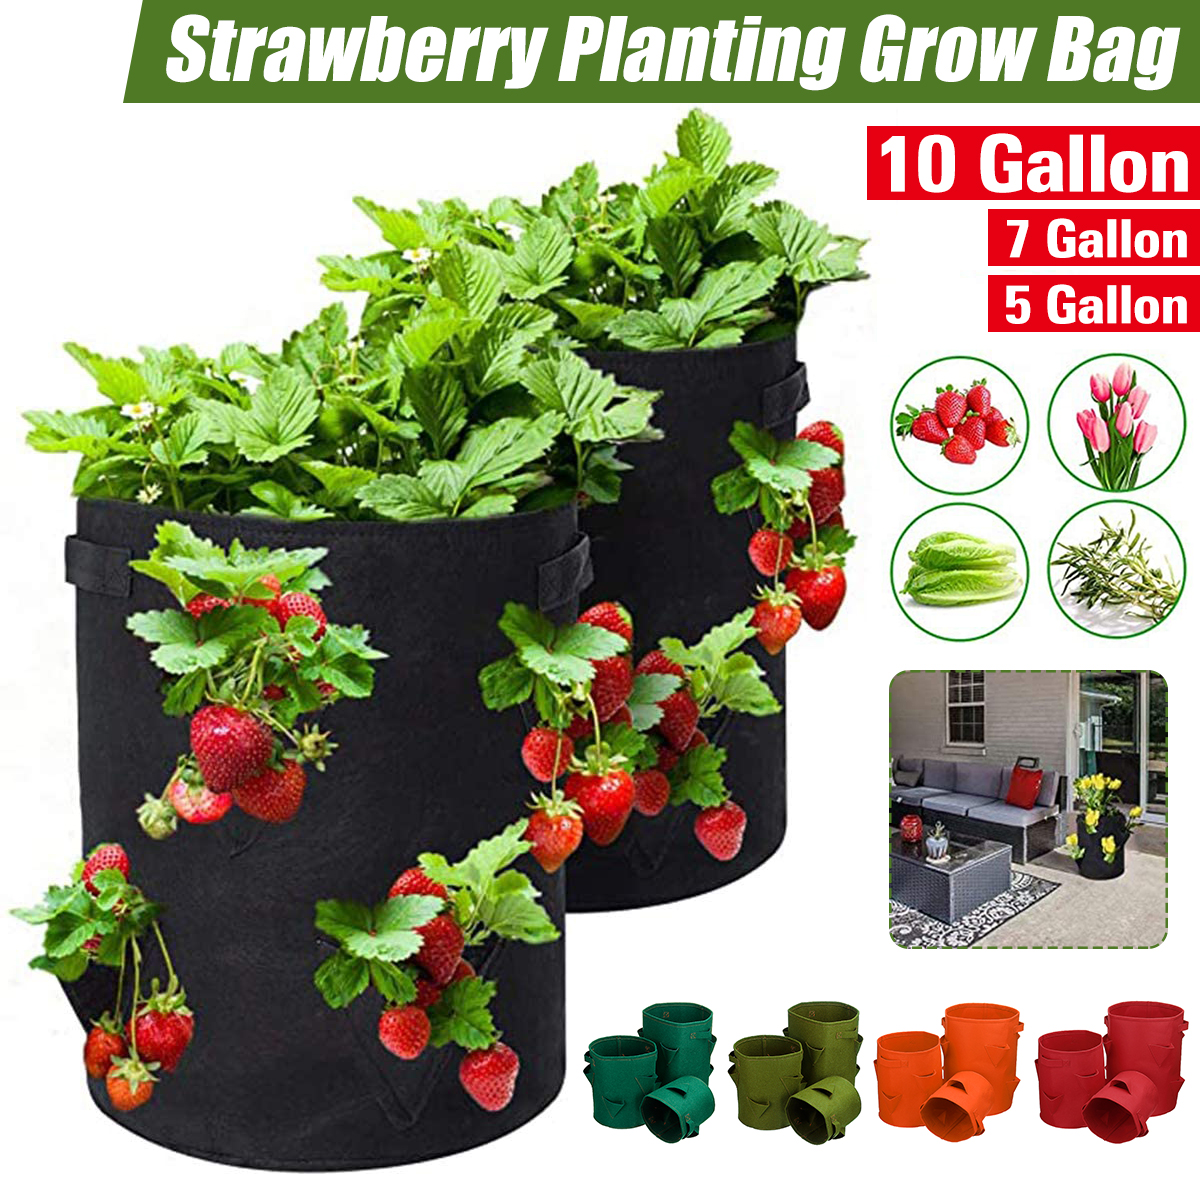 5710-Gallon-Strawberry-Planting-Grow-Bag-Plant-Bags-with-368-Side-Pockets-1751911-1